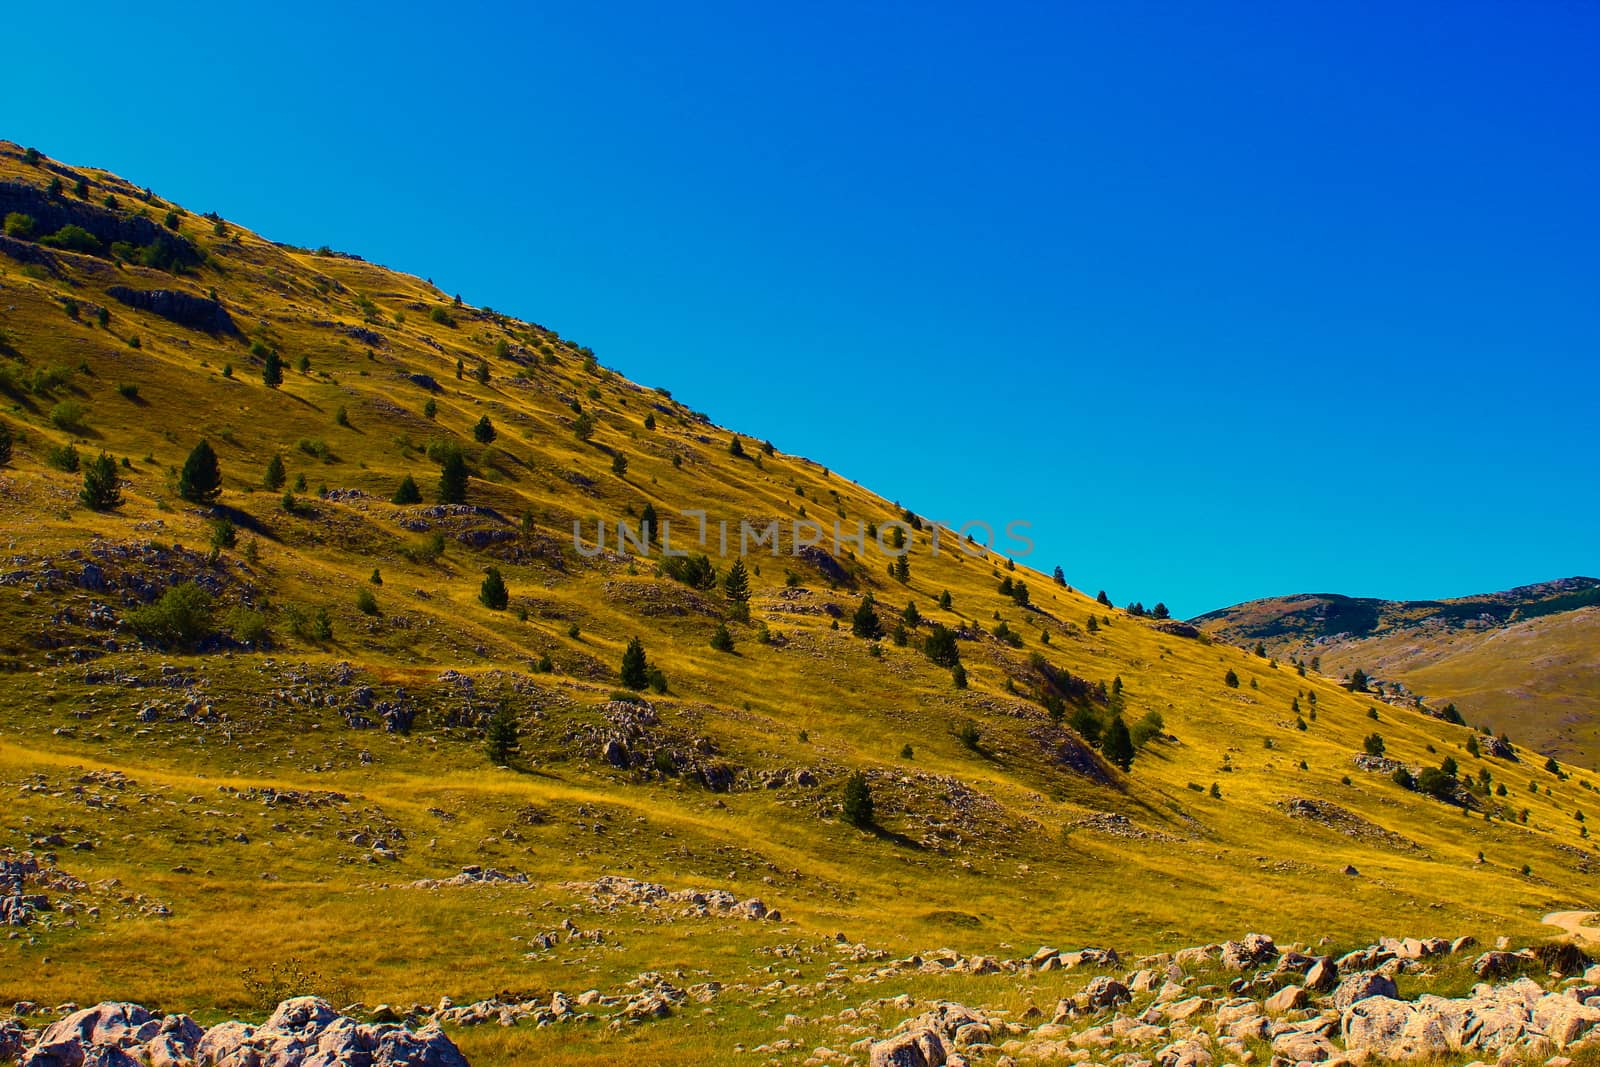 Over saturated. Wavy, hilly, rocky landscape of the Bosnian mountain Bjelasnica. Bjelasnica Mountain, Bosnia and Herzegovina. by mahirrov